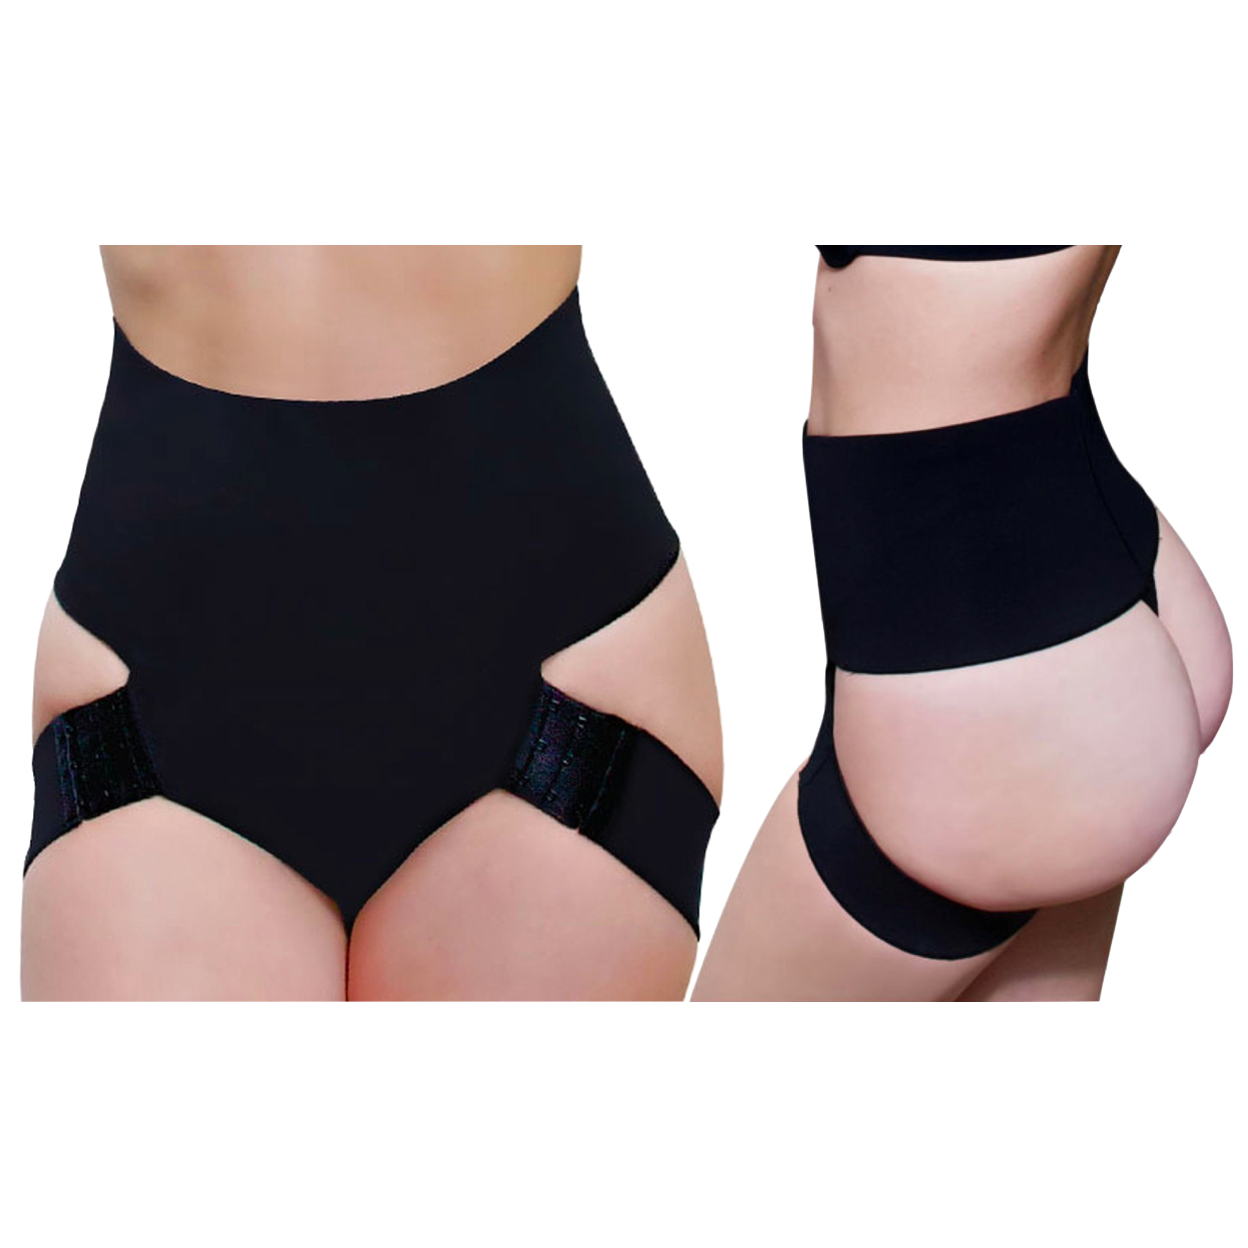 Adjustable Butt Booster Control Shaper In Regular And Plus Sizes - Black, L